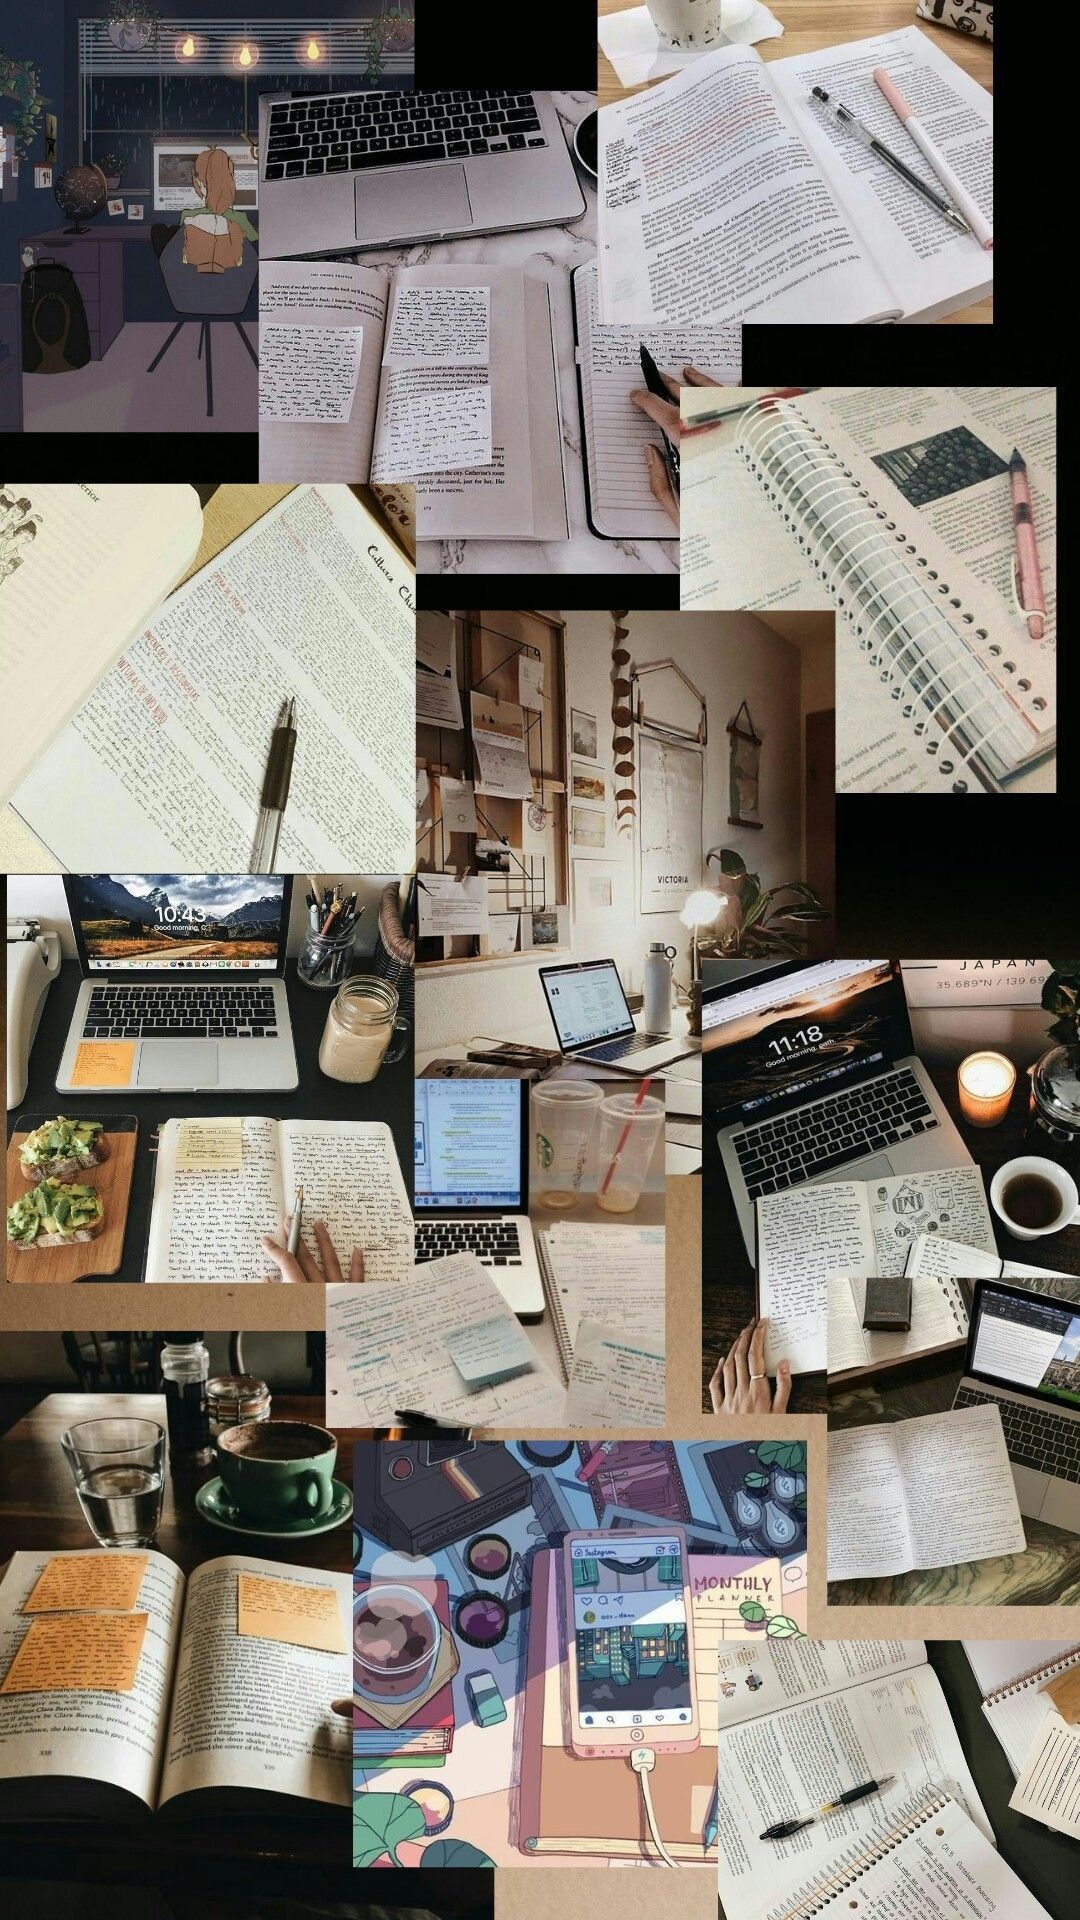 Aesthetic collage of study notes, books, and laptops. - Study